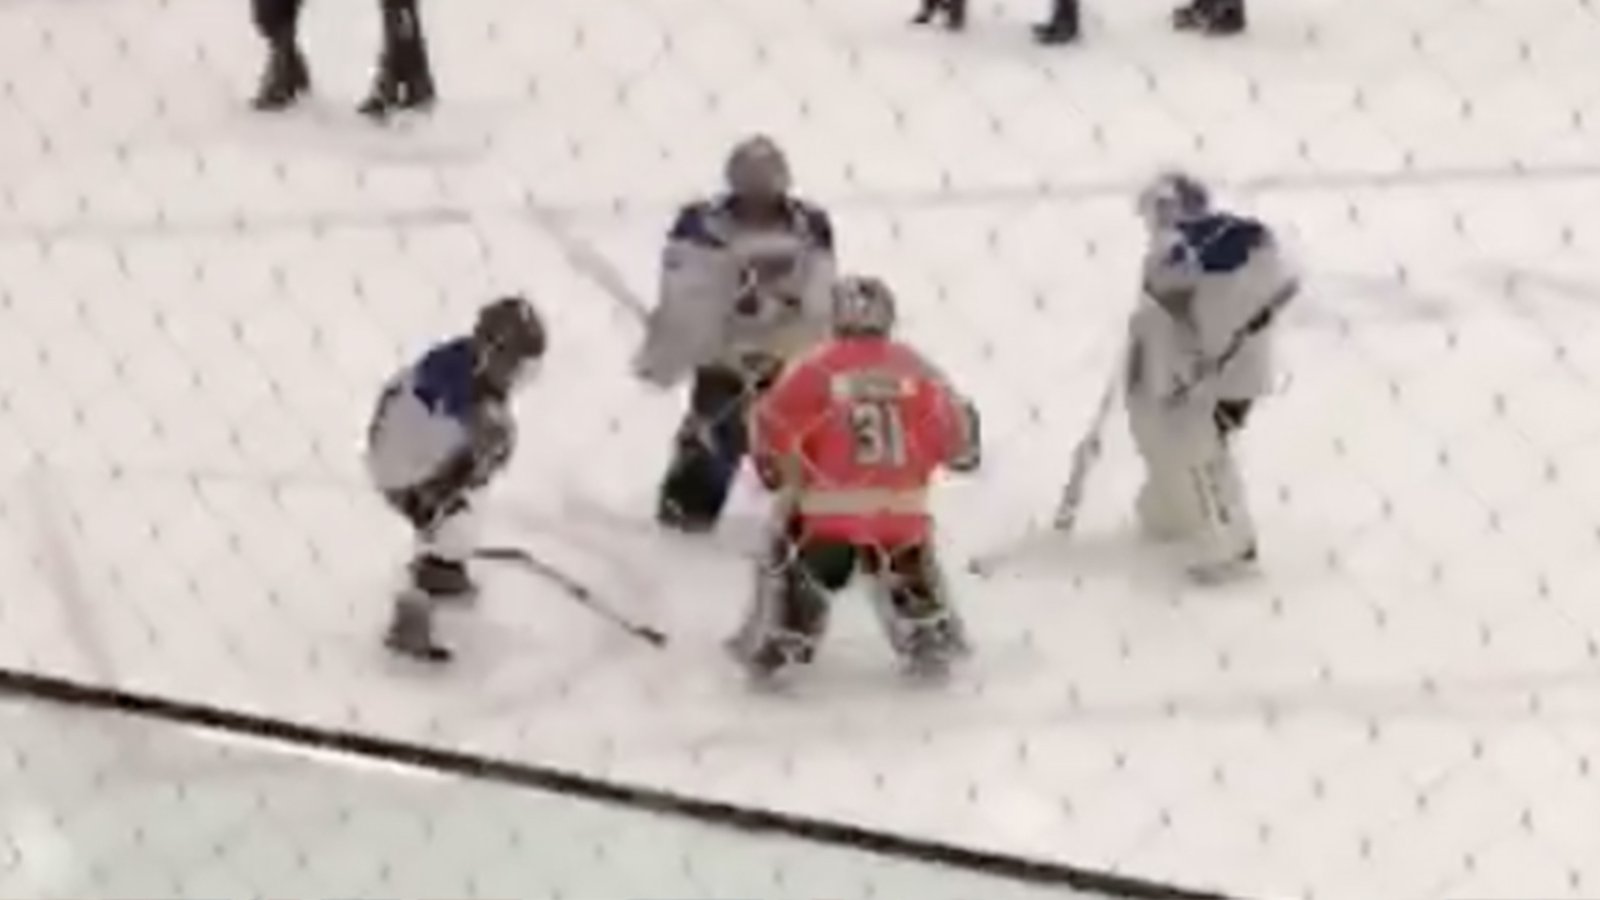 Two young goalies having an on-ice dance-off is the cutest thing you’ll see today